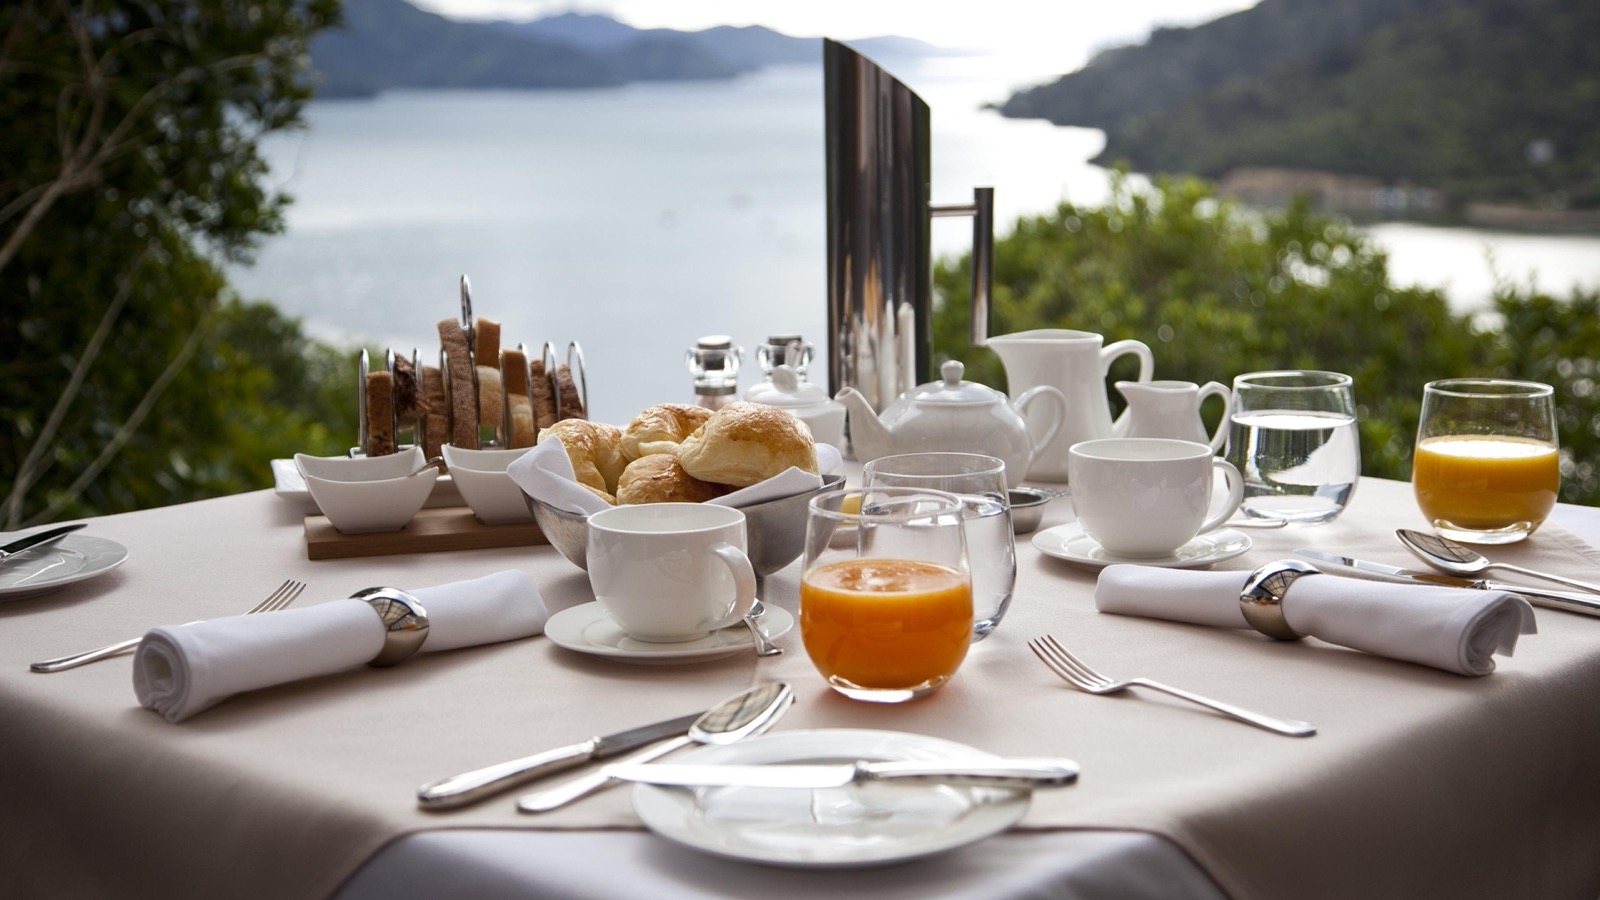 Take a Trip to New York City to Find Out Where You’ll Meet Your Soulmate Breakfast With A View